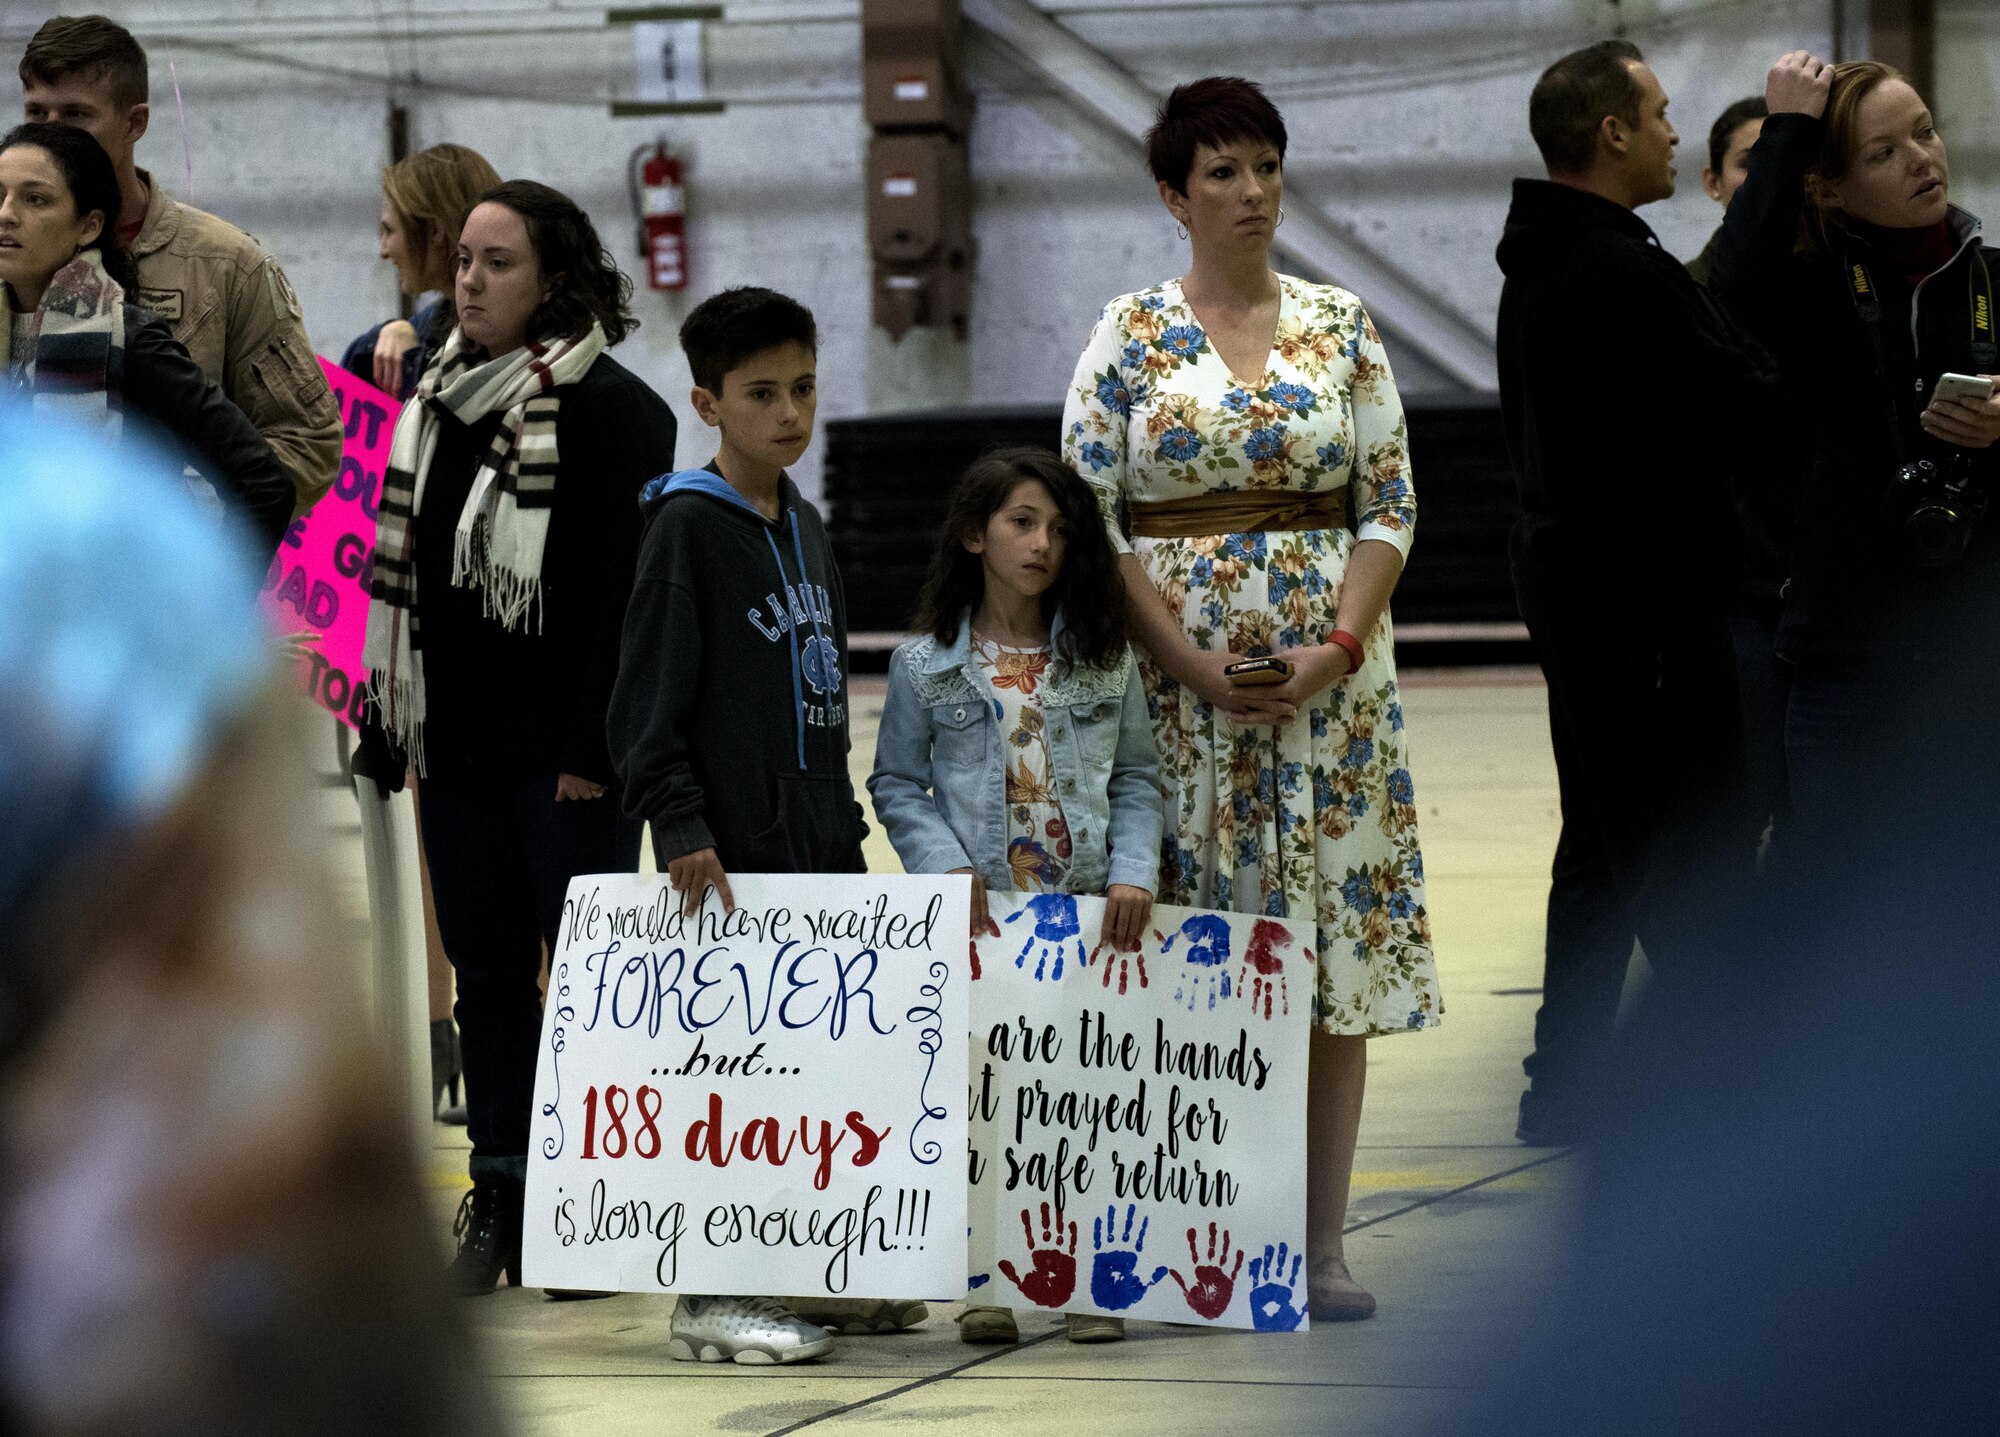 Family members of Airmen assigned to the 480th Expeditionary Fighter Squadron await the squadron’s arrival back to Spangdahlem Air Base, Germany, Oct. 12, 2016. Friends and family members gathered at Hangar One to welcome home the 480th EFS, which deployed to Southwest Asia in support of Operation Inherent Resolve, whose mission aims to defeat enemy forces in the Combined Joint Force Area. (U.S. Air Force photo/Airman 1st Class Preston Cherry)